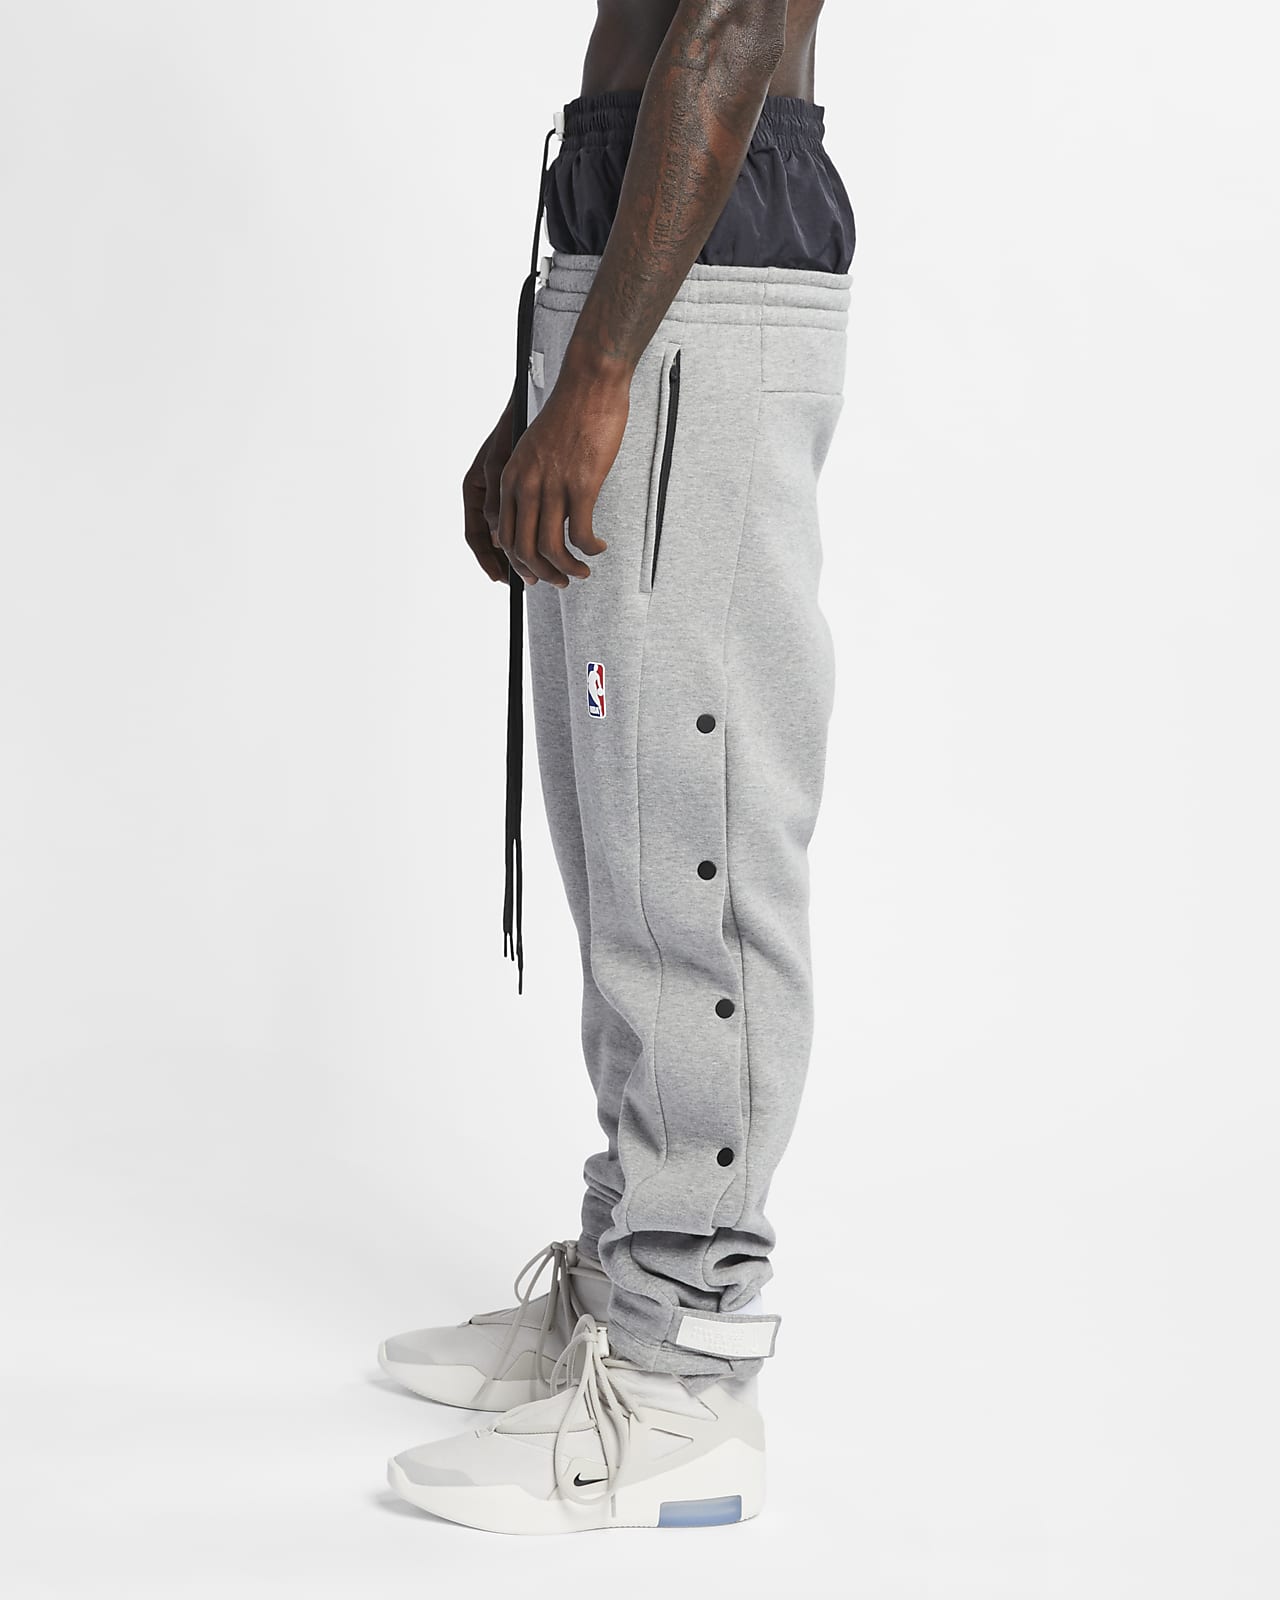 VERY Underrated Nike x Fear of God Pants